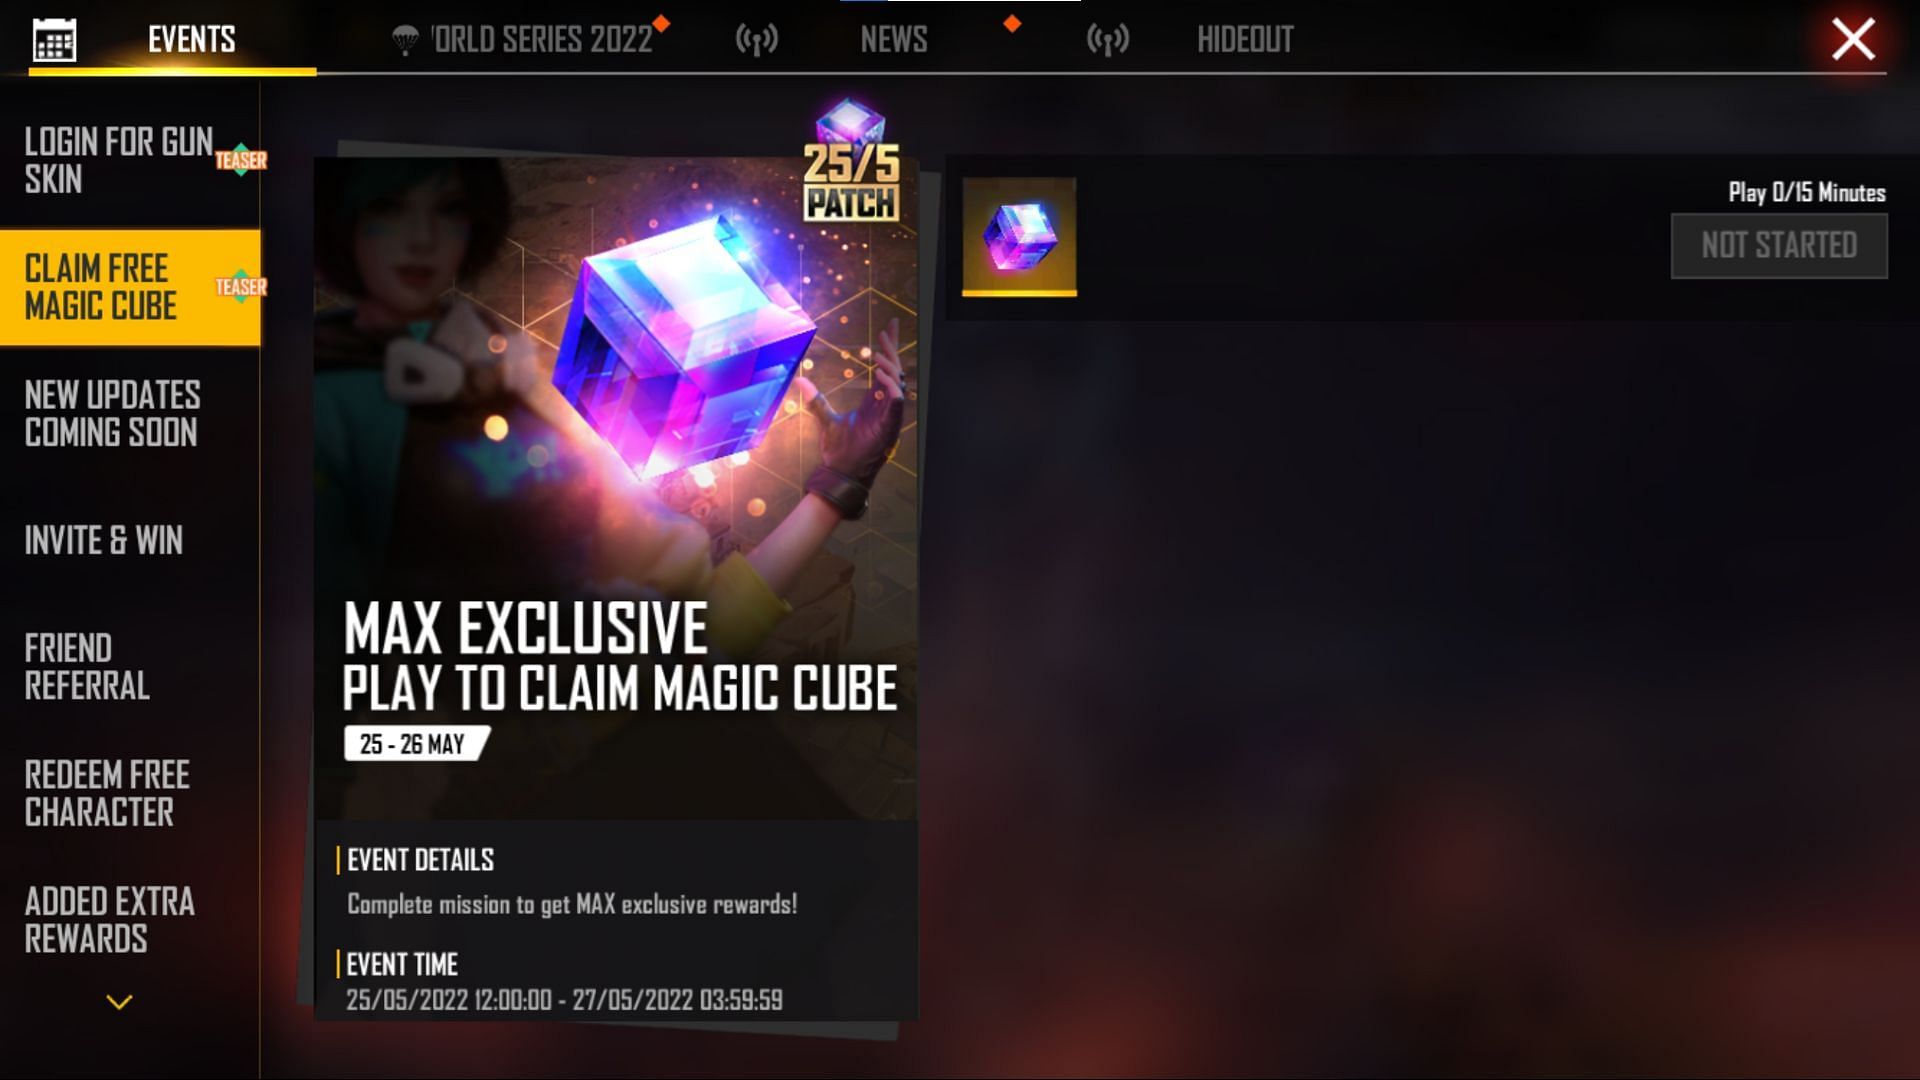 This event will be rewarding a Magic Cube for free (Image via Sportskeeda)